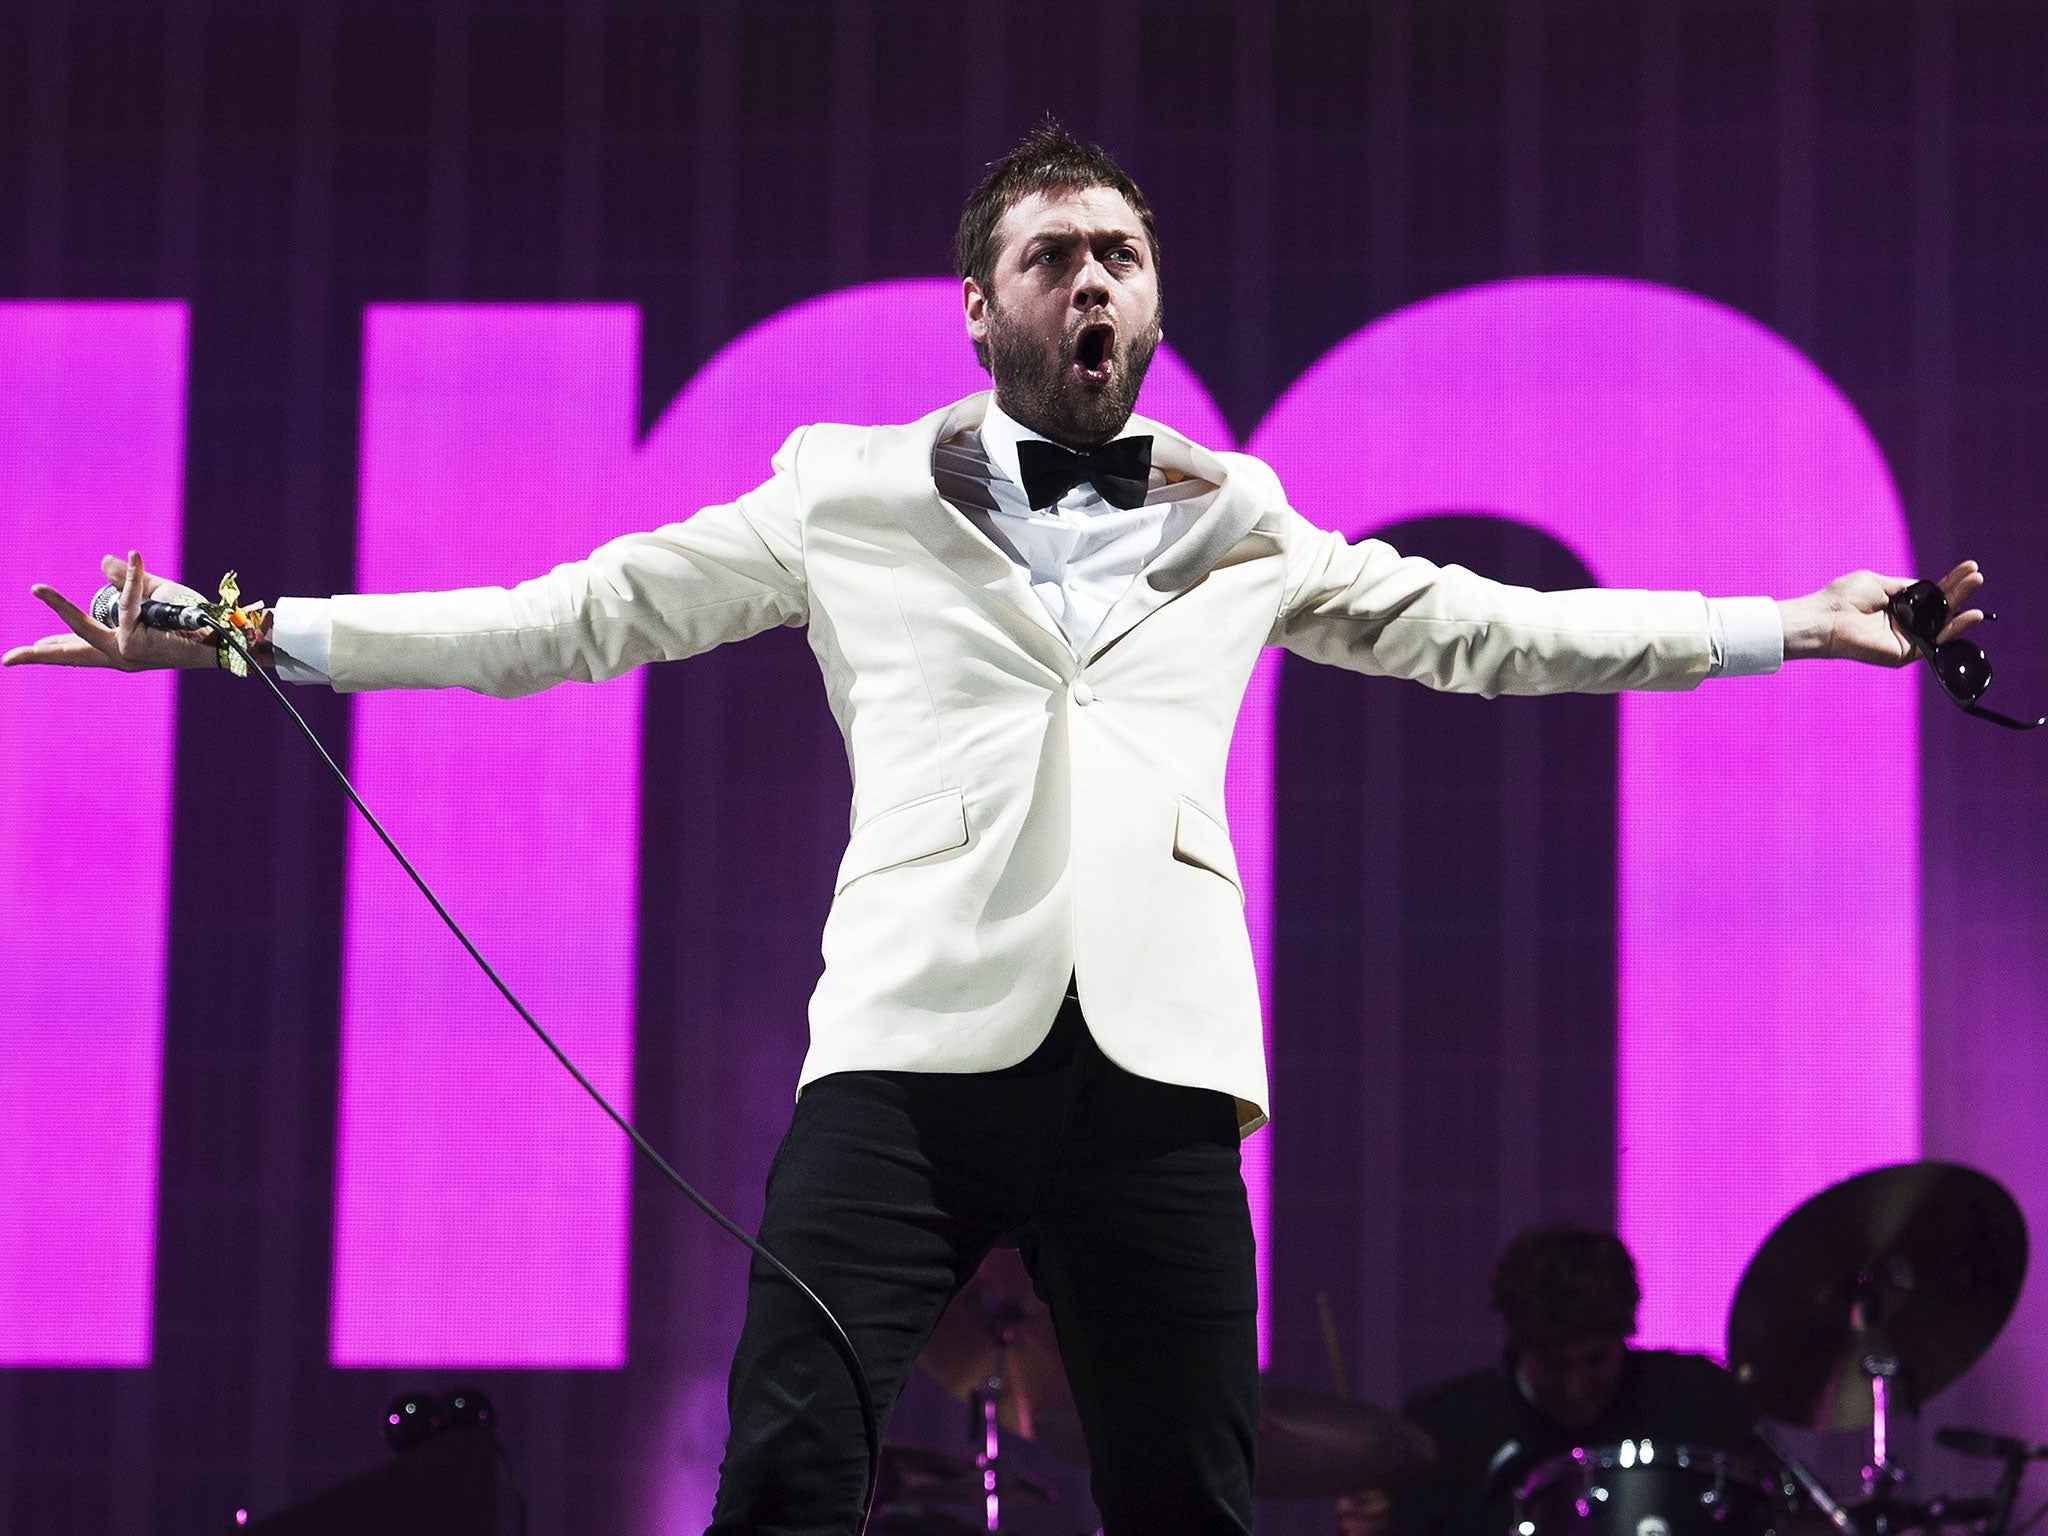 Kasabian frontman Tom Meighan performs on the Pyramid Stage at Glastonbury in 2014